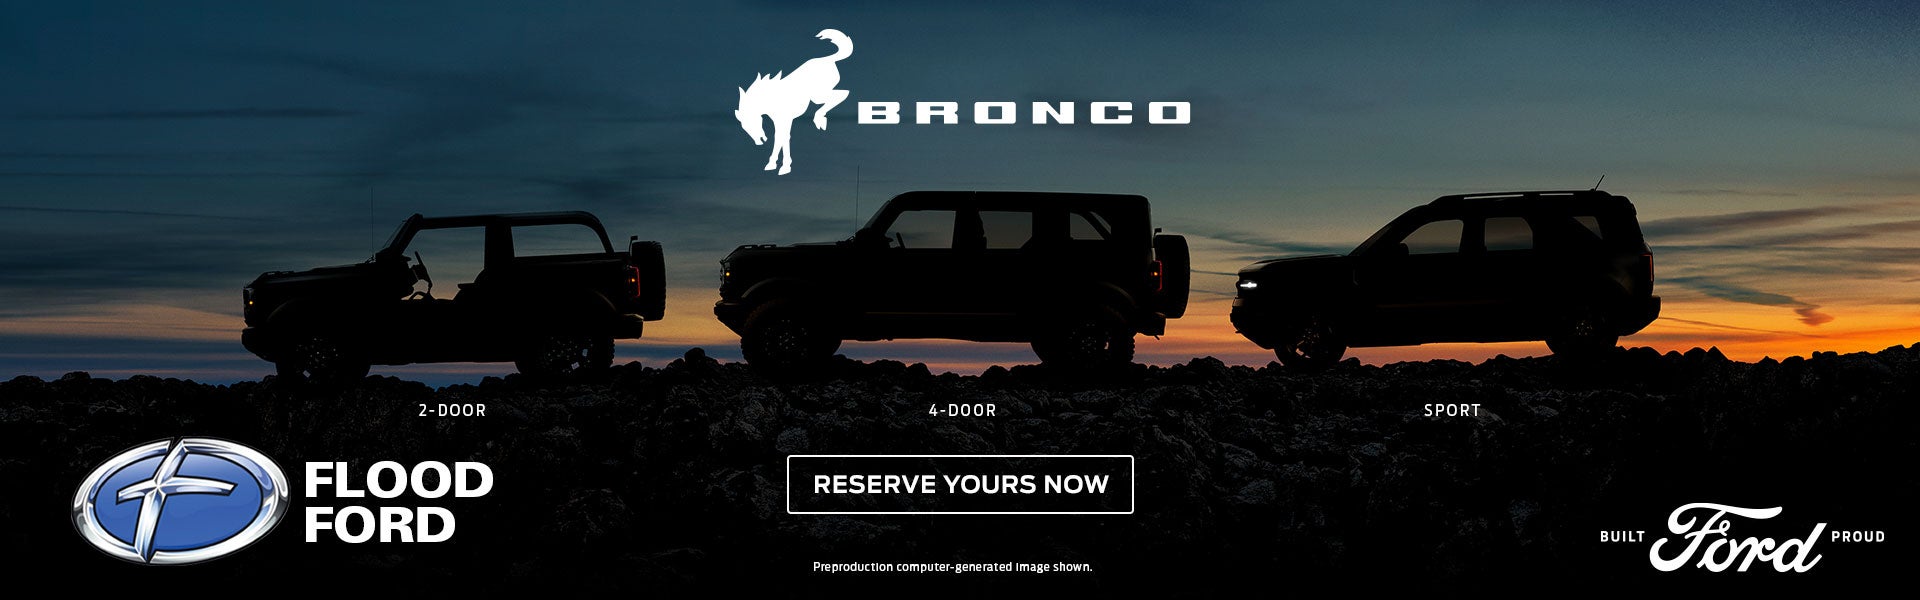 The 2021 Ford Bronco: Reserve your today!